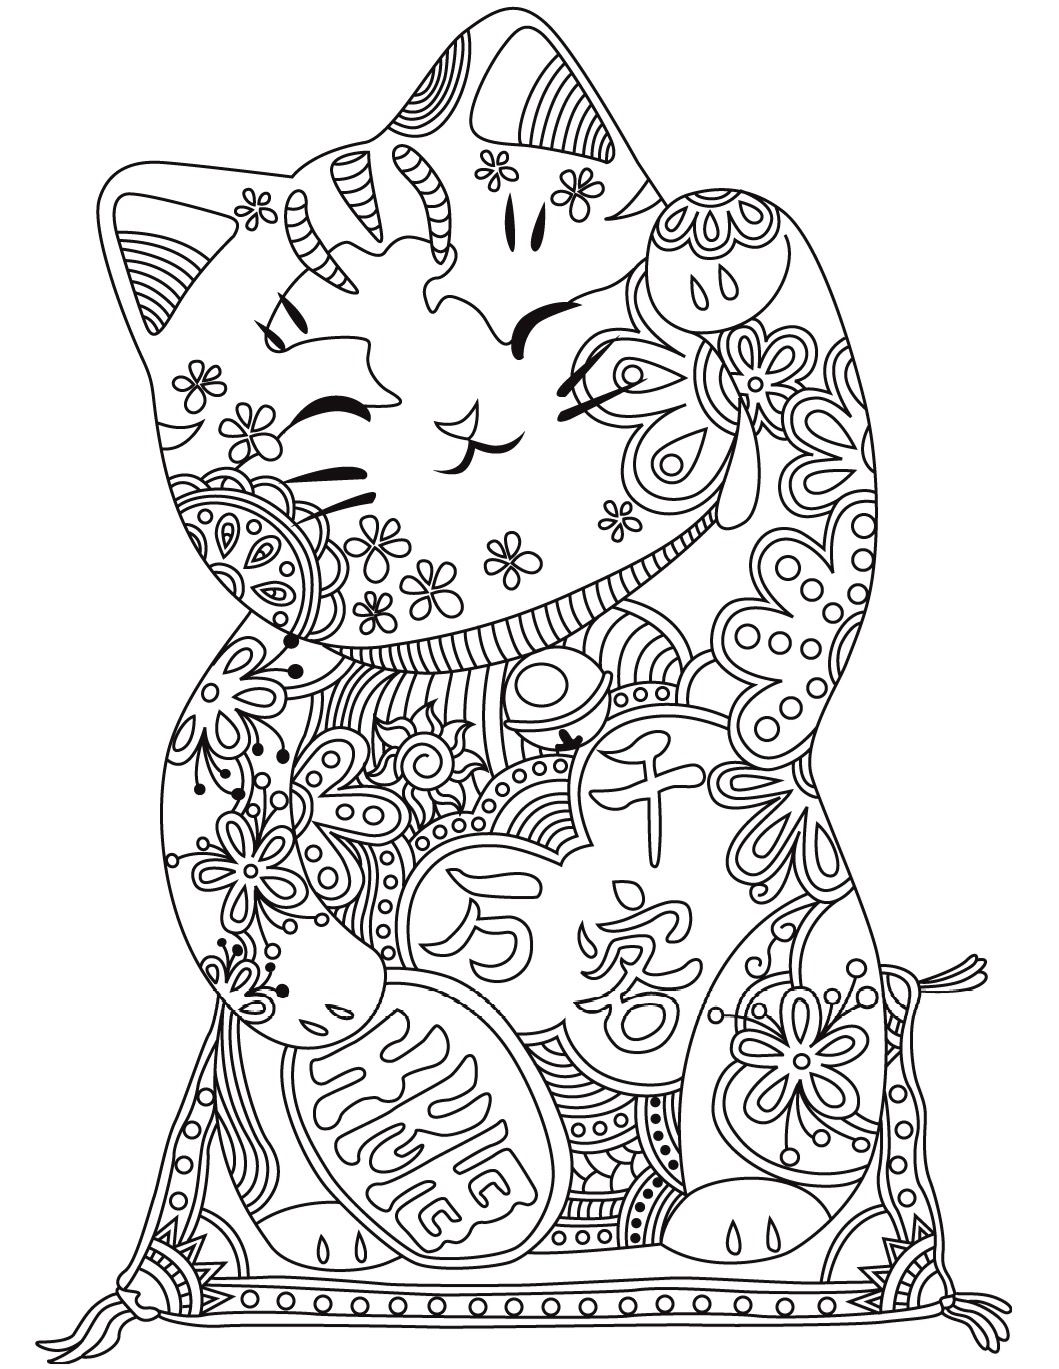 cat-coloring-pages-for-adults-printable